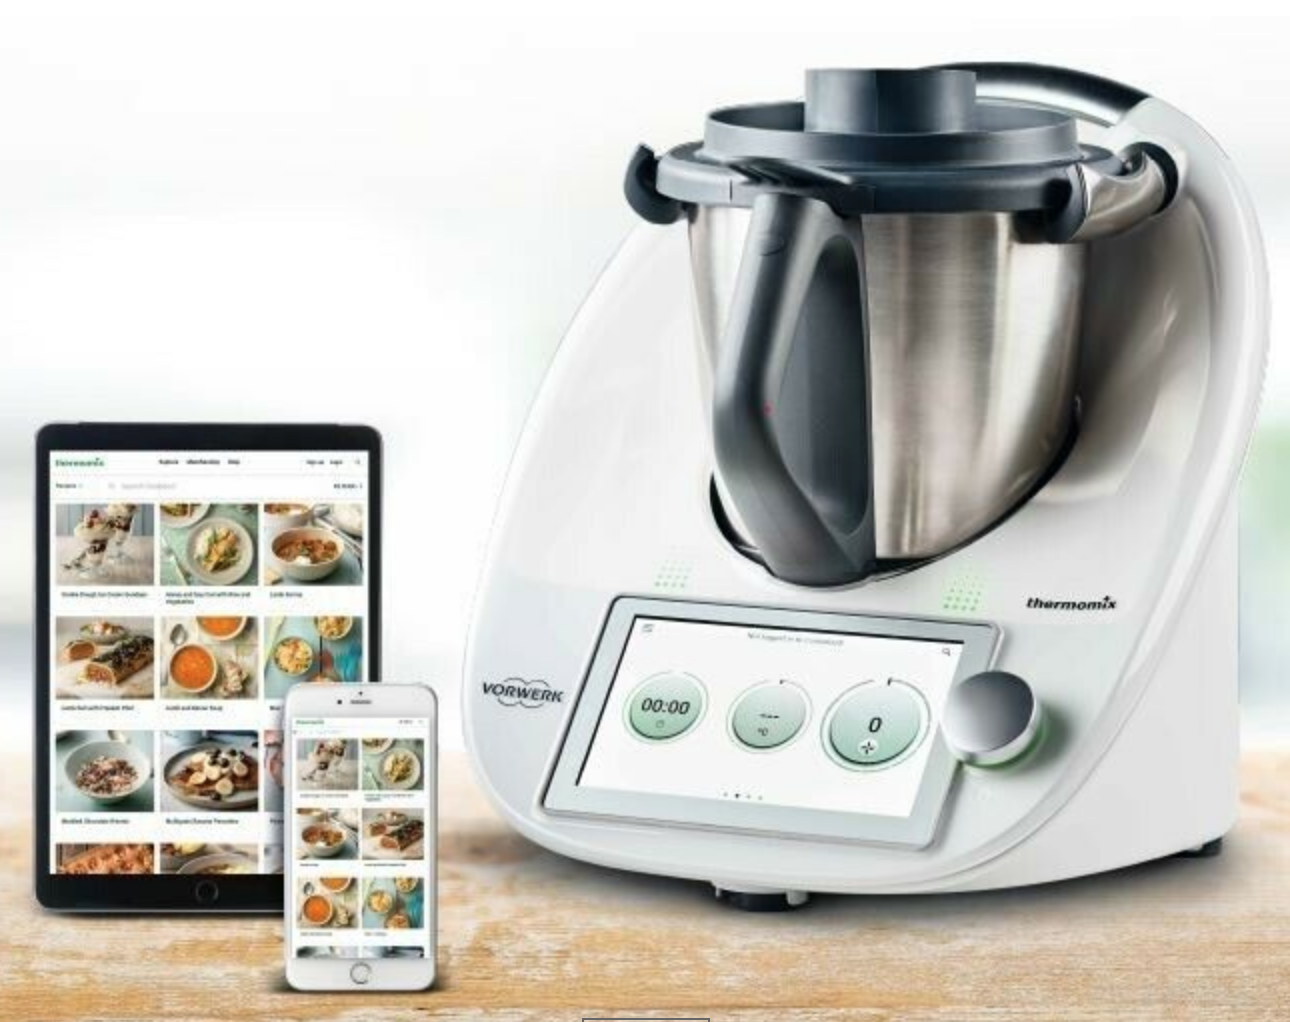 Thermomix® TM6®: The All-in-One Cooking Robot That Does It All